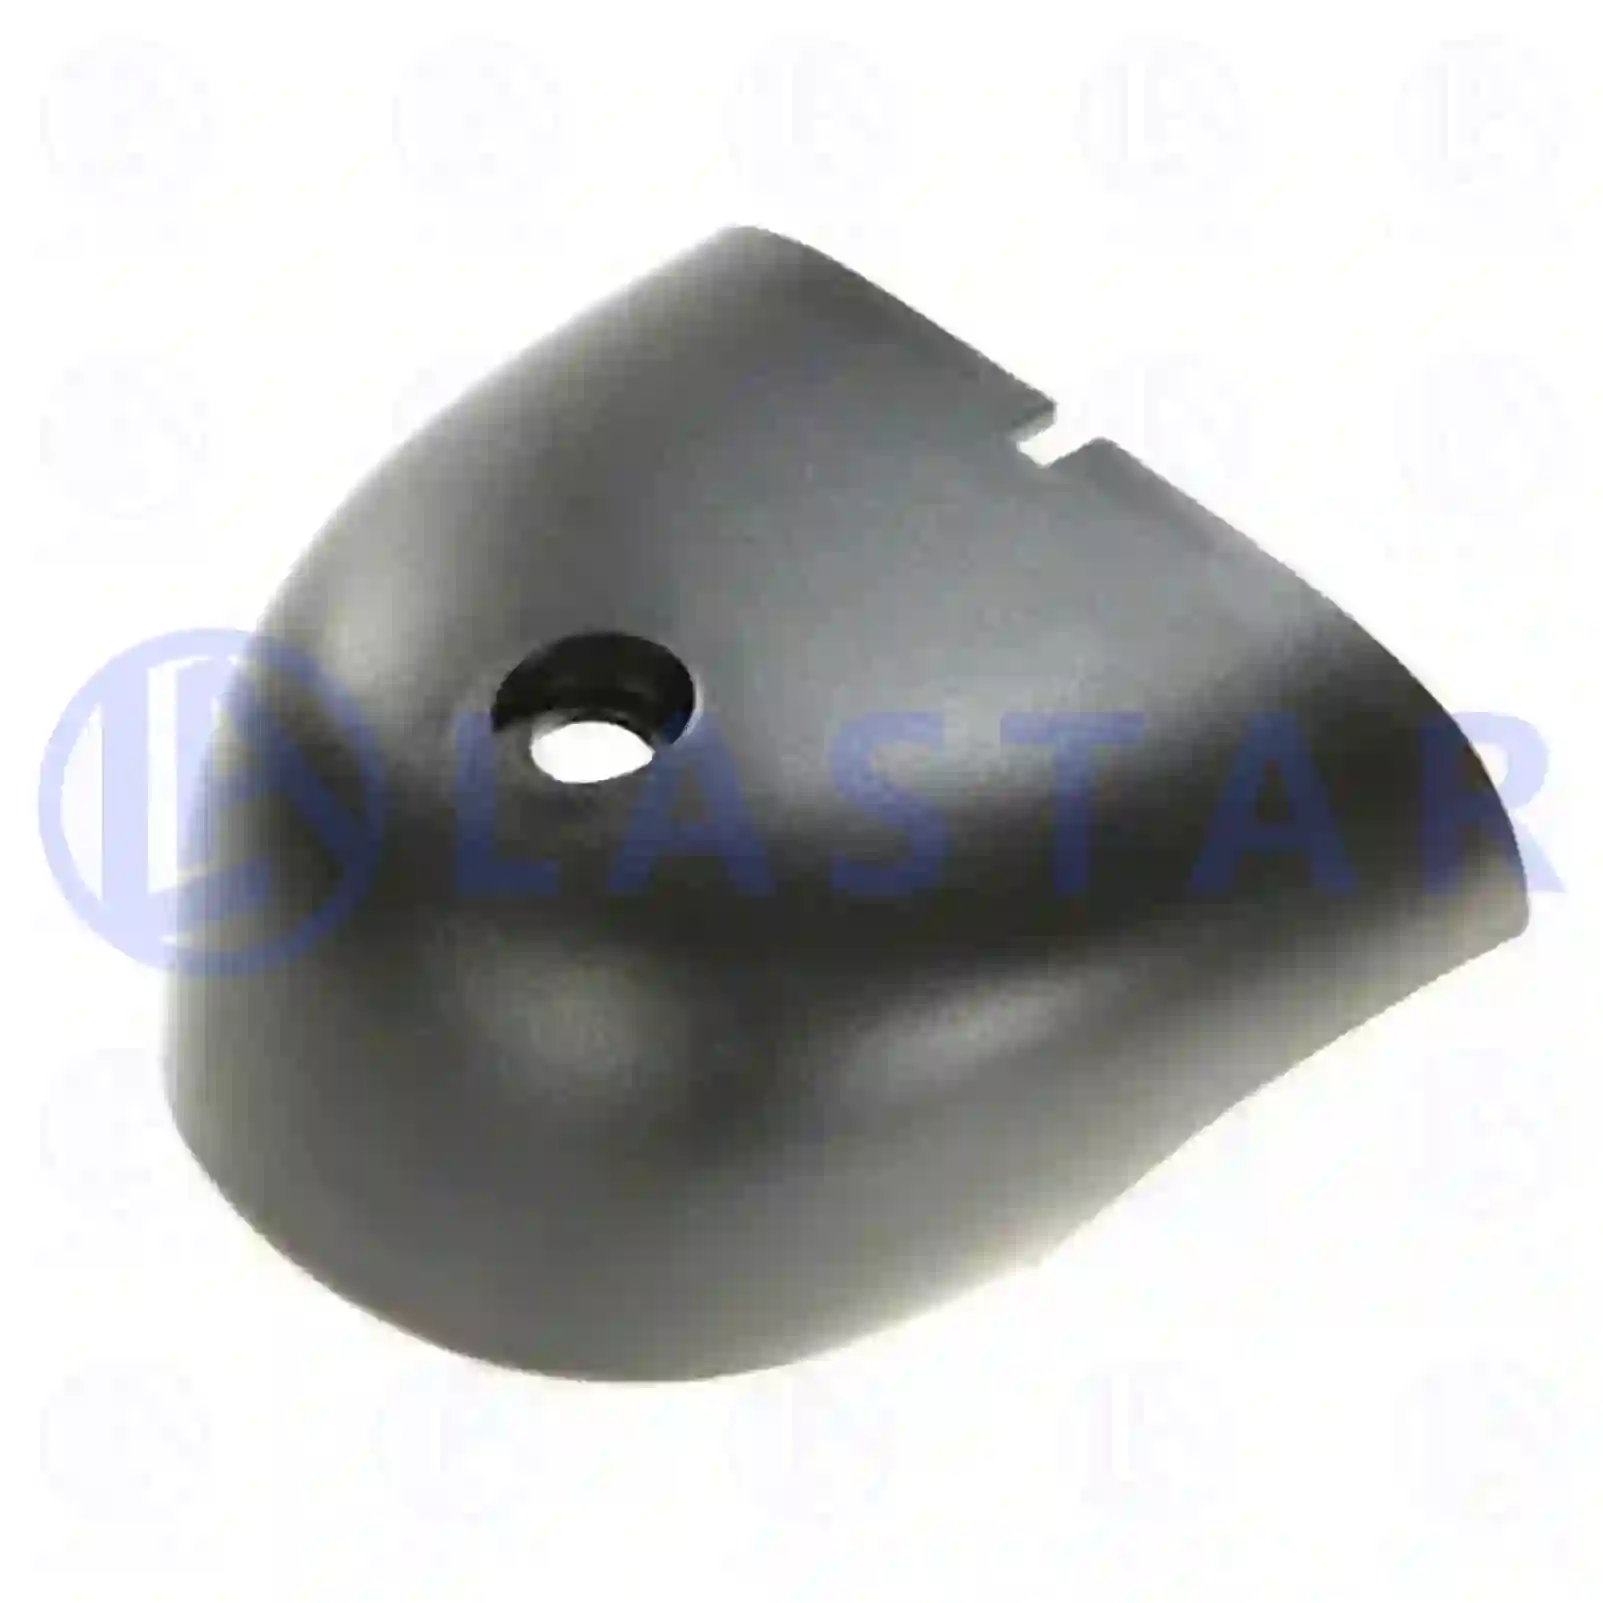 Cover, mirror bracket, lower, 77721530, 1346380, ZG60483-0008 ||  77721530 Lastar Spare Part | Truck Spare Parts, Auotomotive Spare Parts Cover, mirror bracket, lower, 77721530, 1346380, ZG60483-0008 ||  77721530 Lastar Spare Part | Truck Spare Parts, Auotomotive Spare Parts